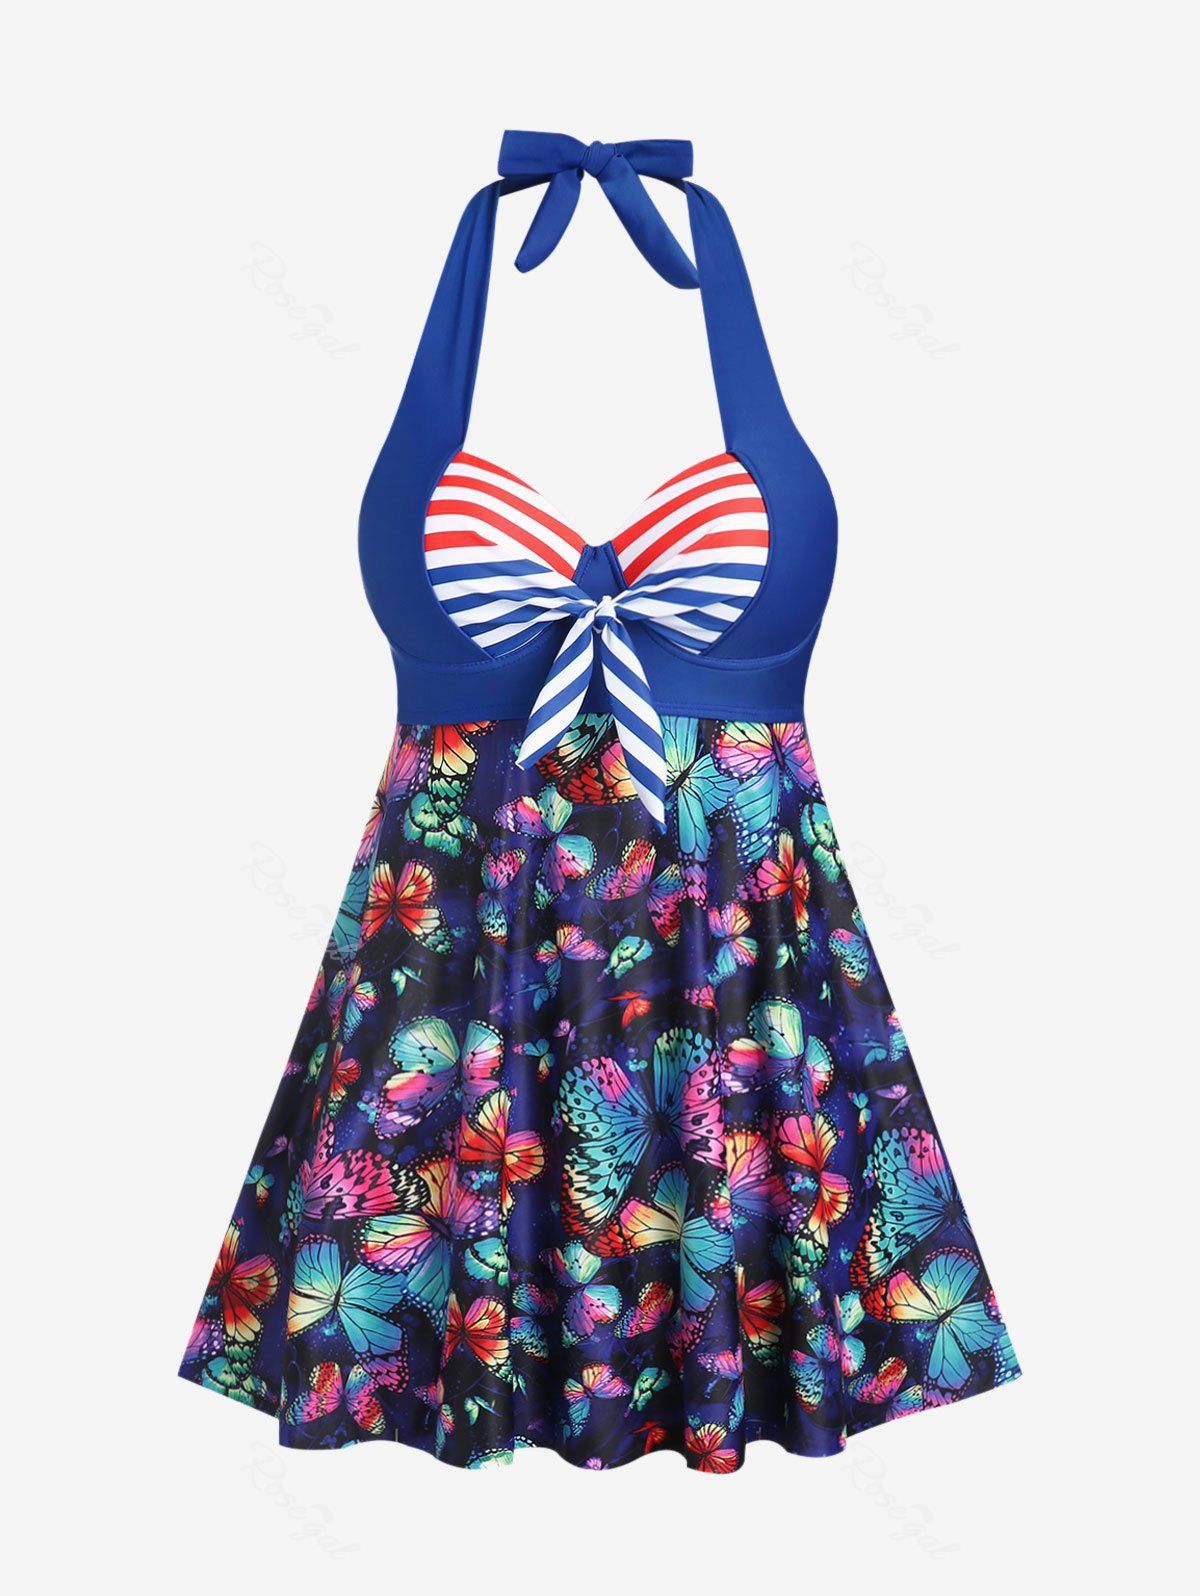 New Plus Size Halter Patriotic American Flag Butterfly Print Tankini Top  